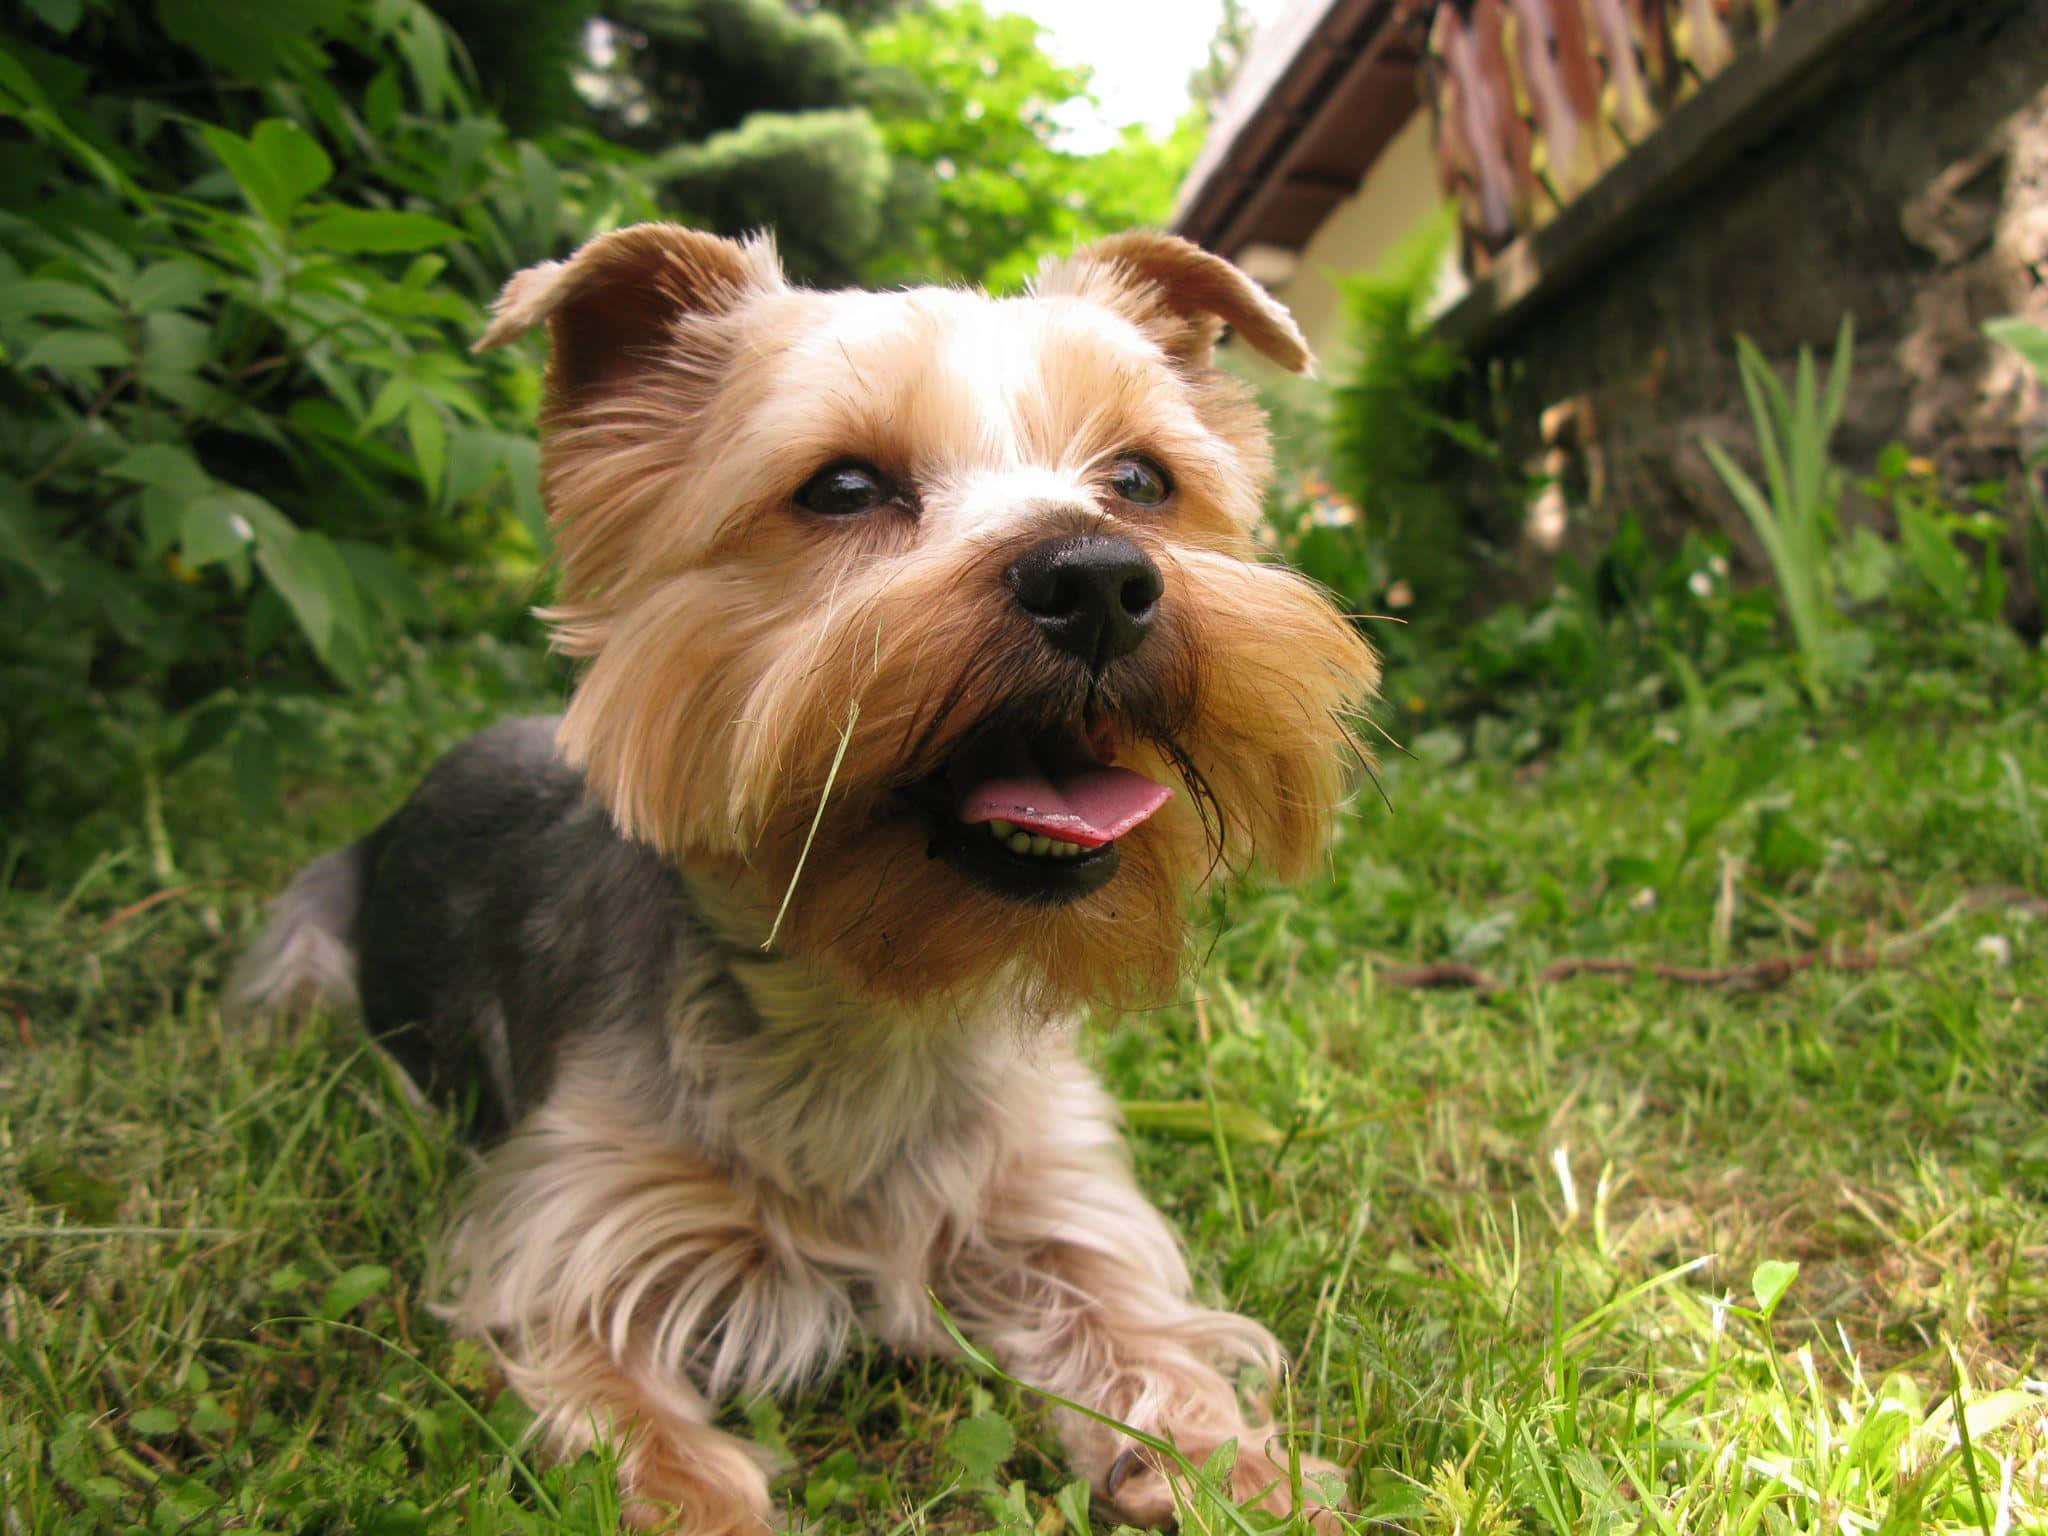 Adorable Yorkshire Terrier Posing Outdoors